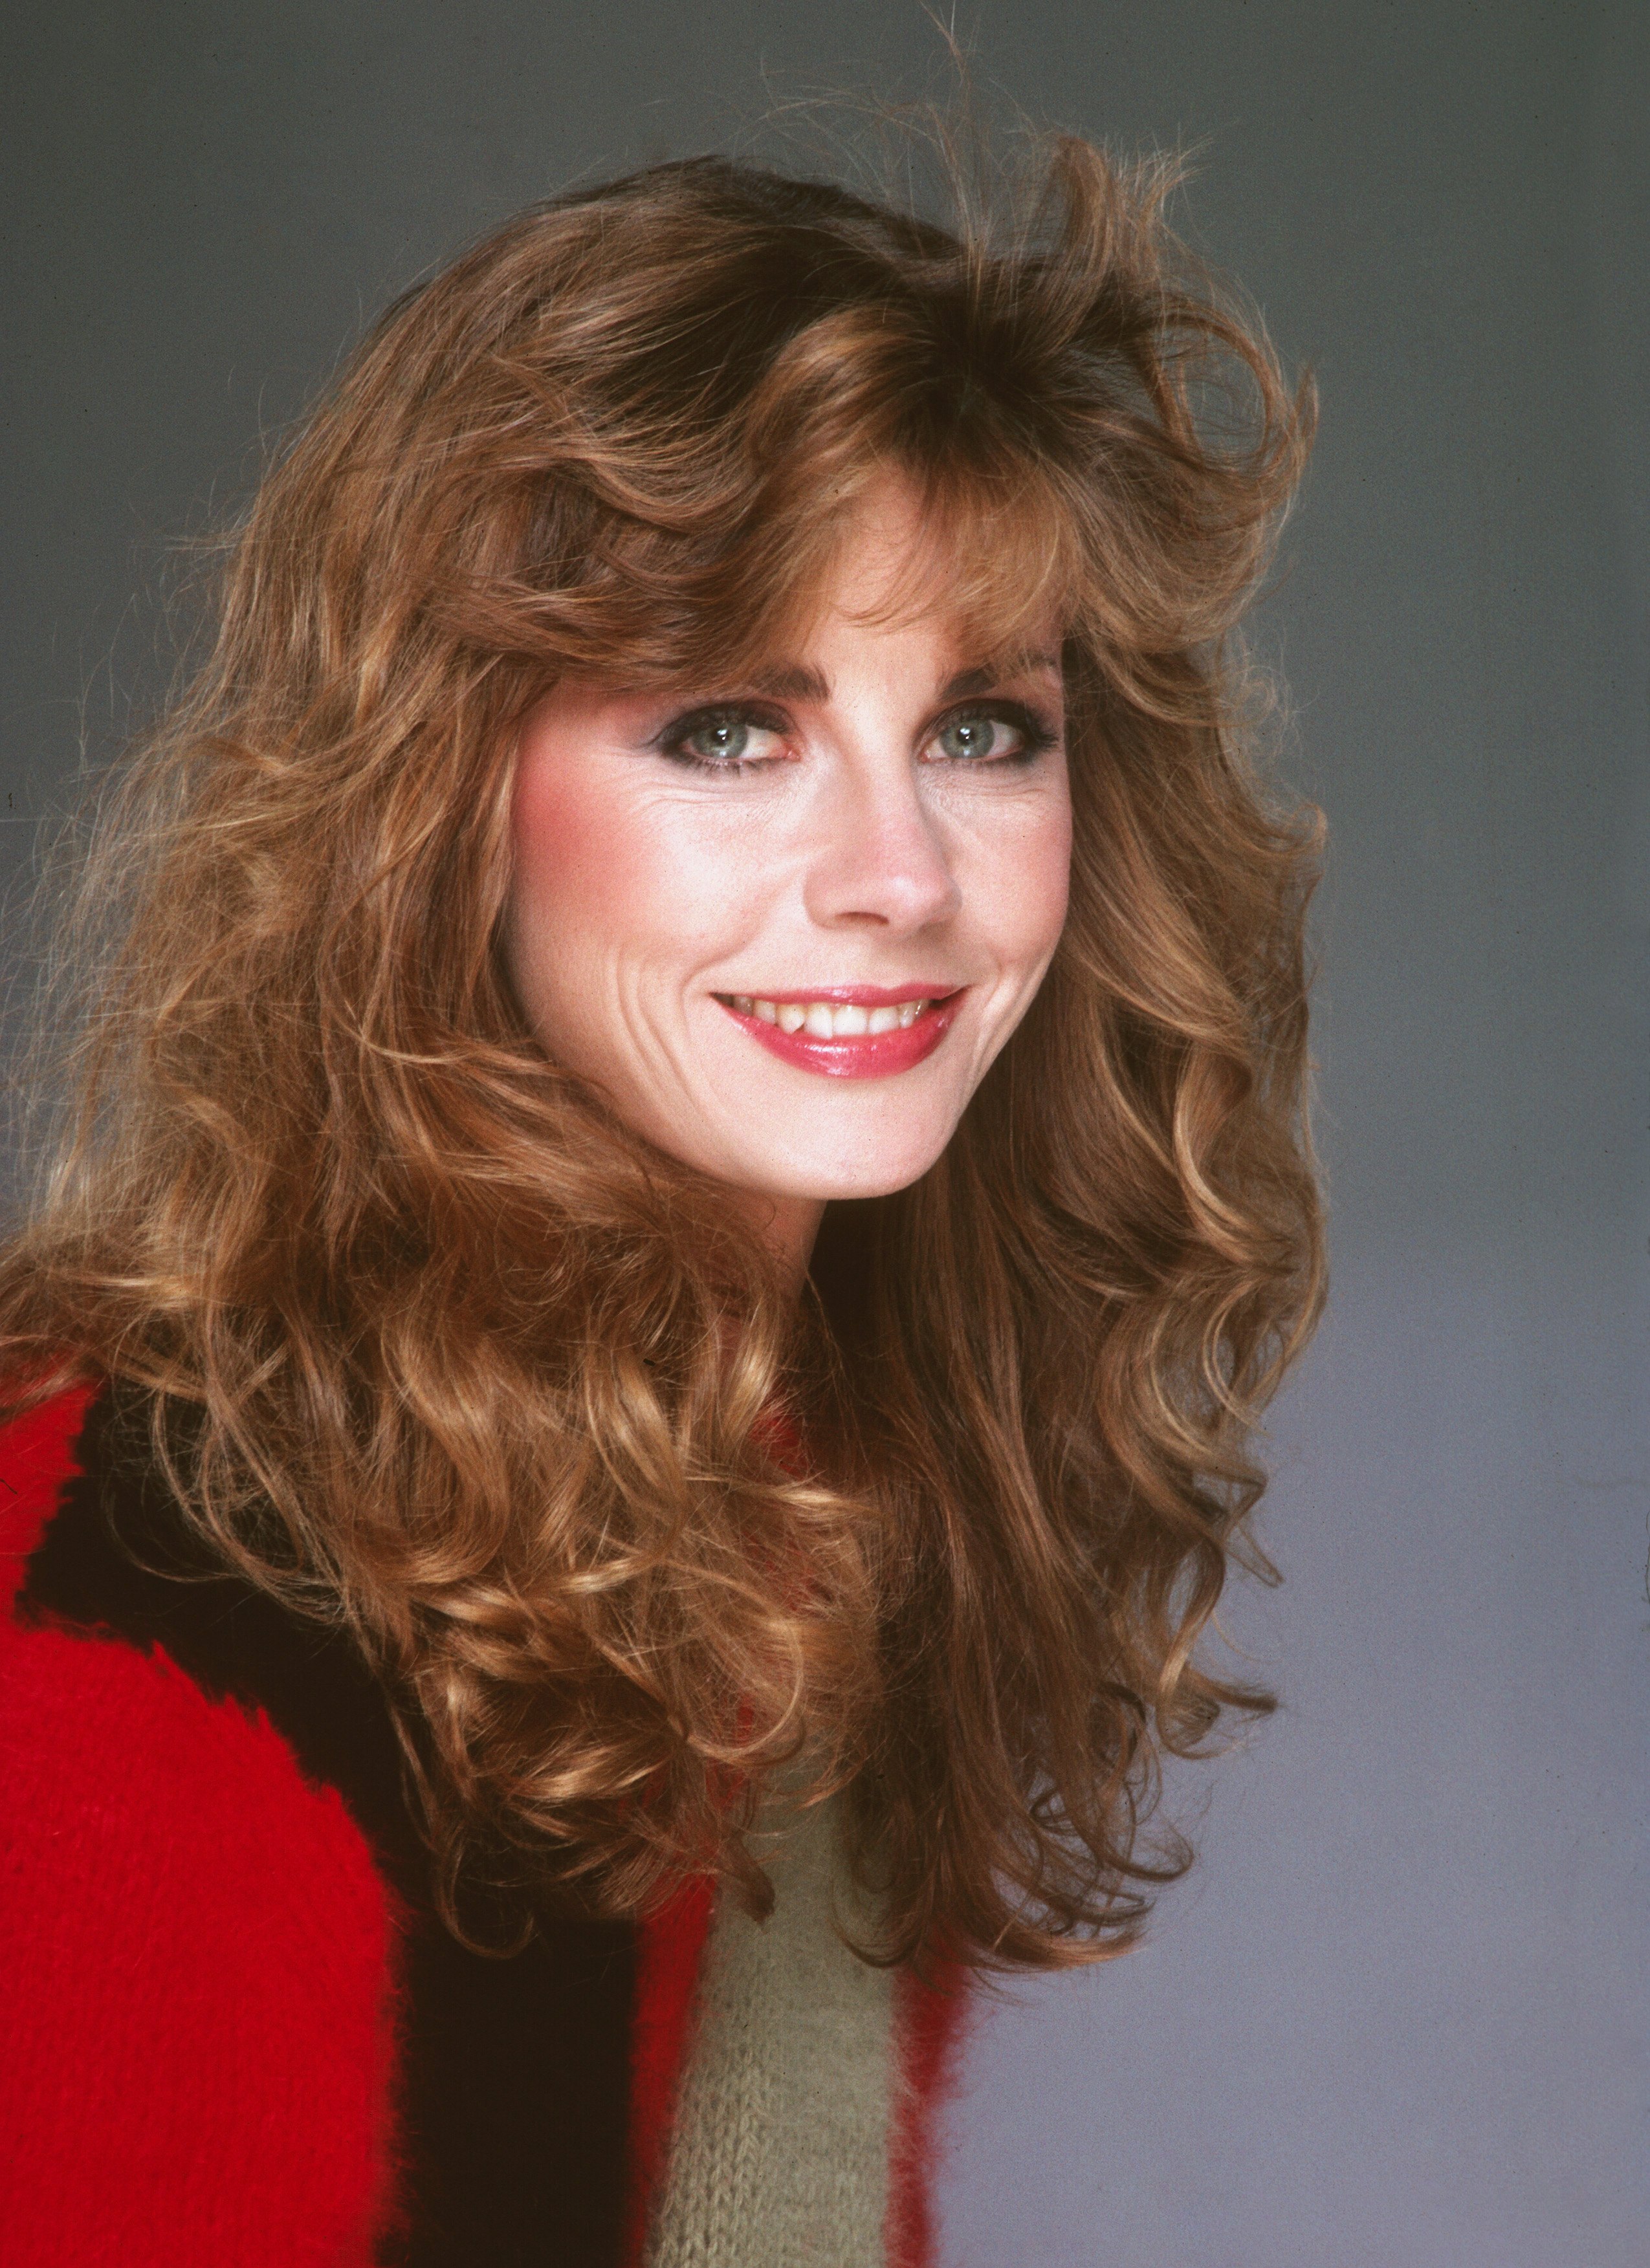 Actress Jan Smithers poses for a portrait on January 1, 1981 in Los Angeles, California | Source: Getty Images